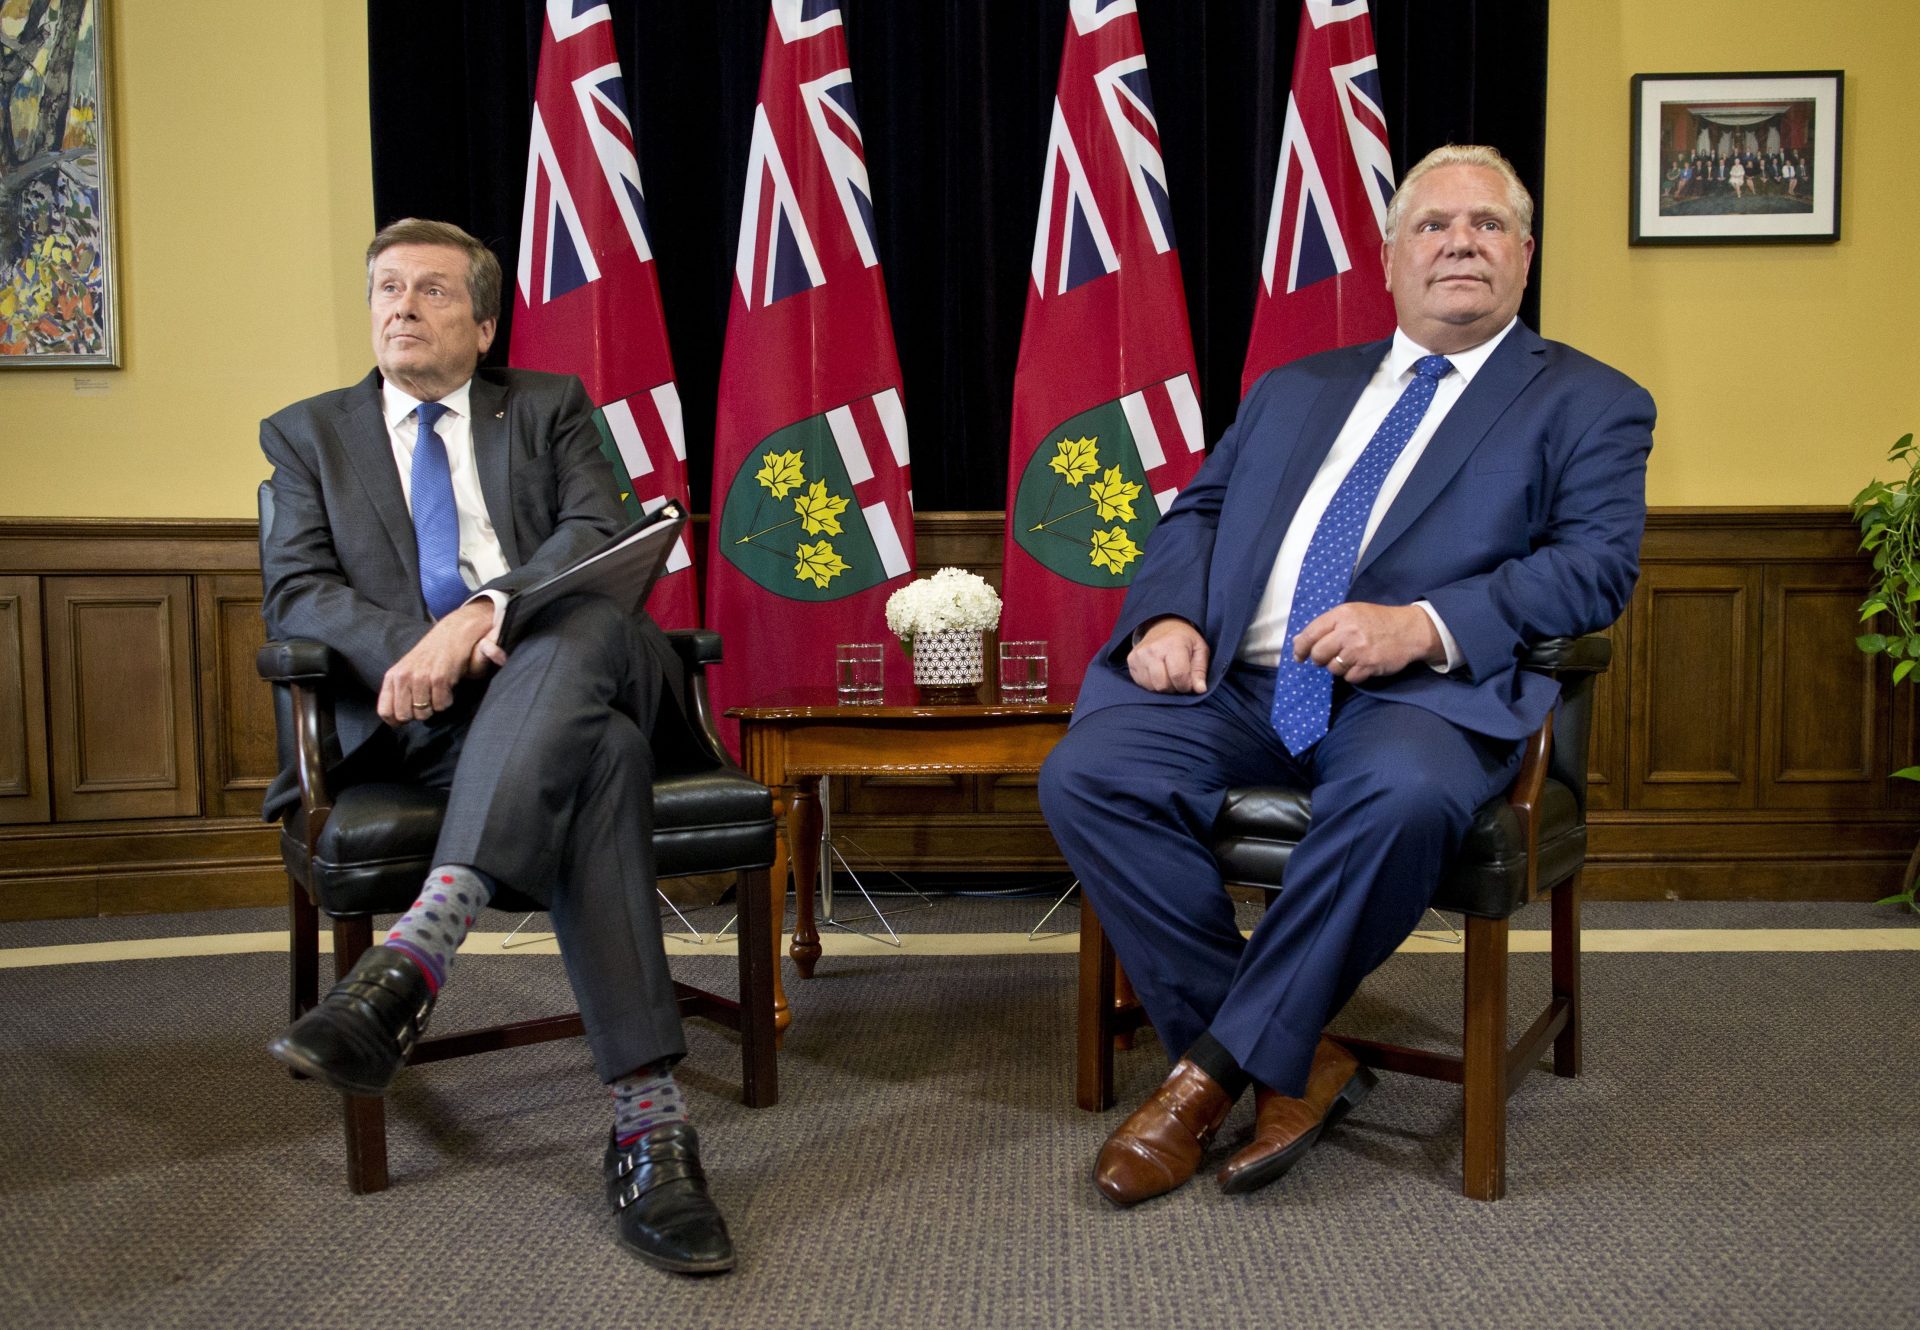 Mayor Tory promises to fight Ford cuts to Toronto 'ward by ward and door to door'